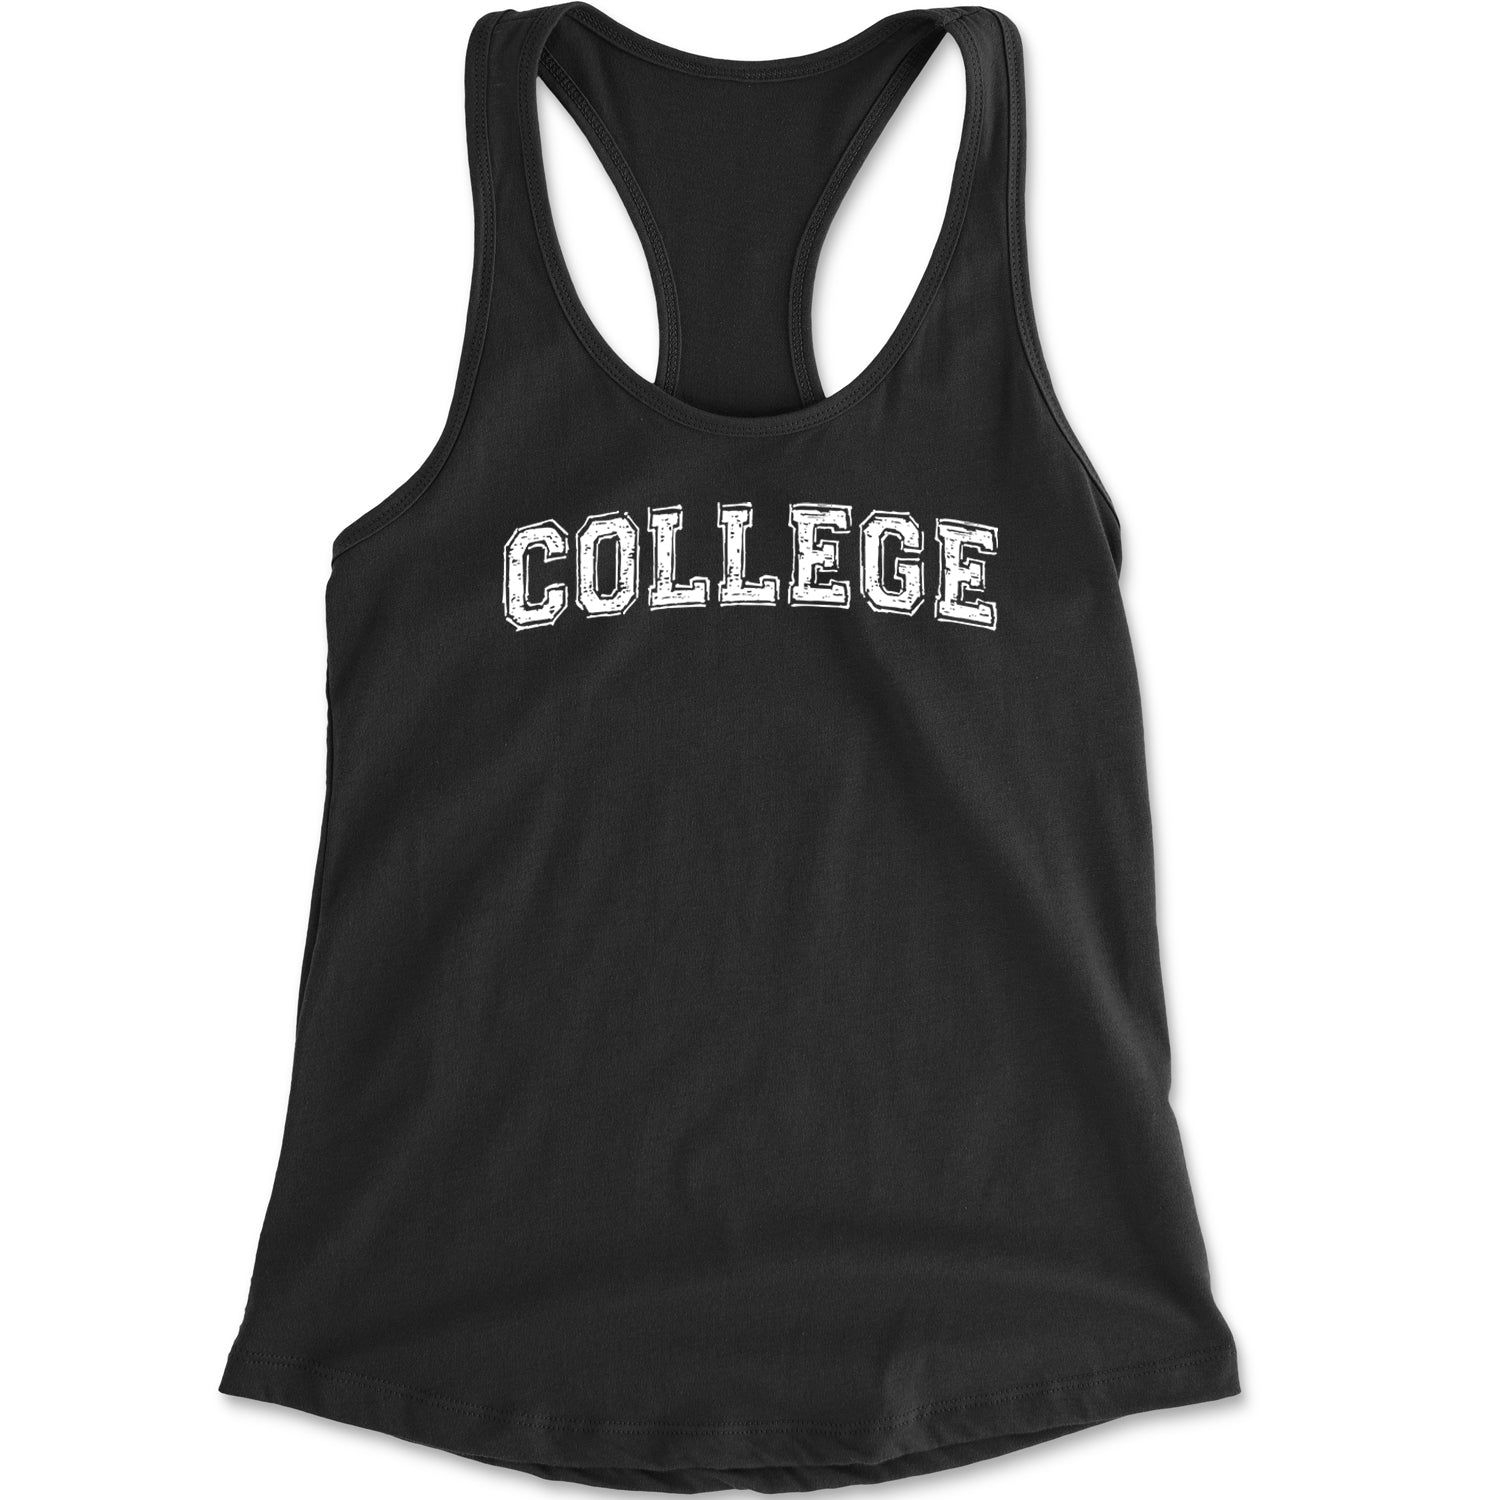 College Belushi Frat House Party Bluto Tribute Animal Racerback Tank Top for Women